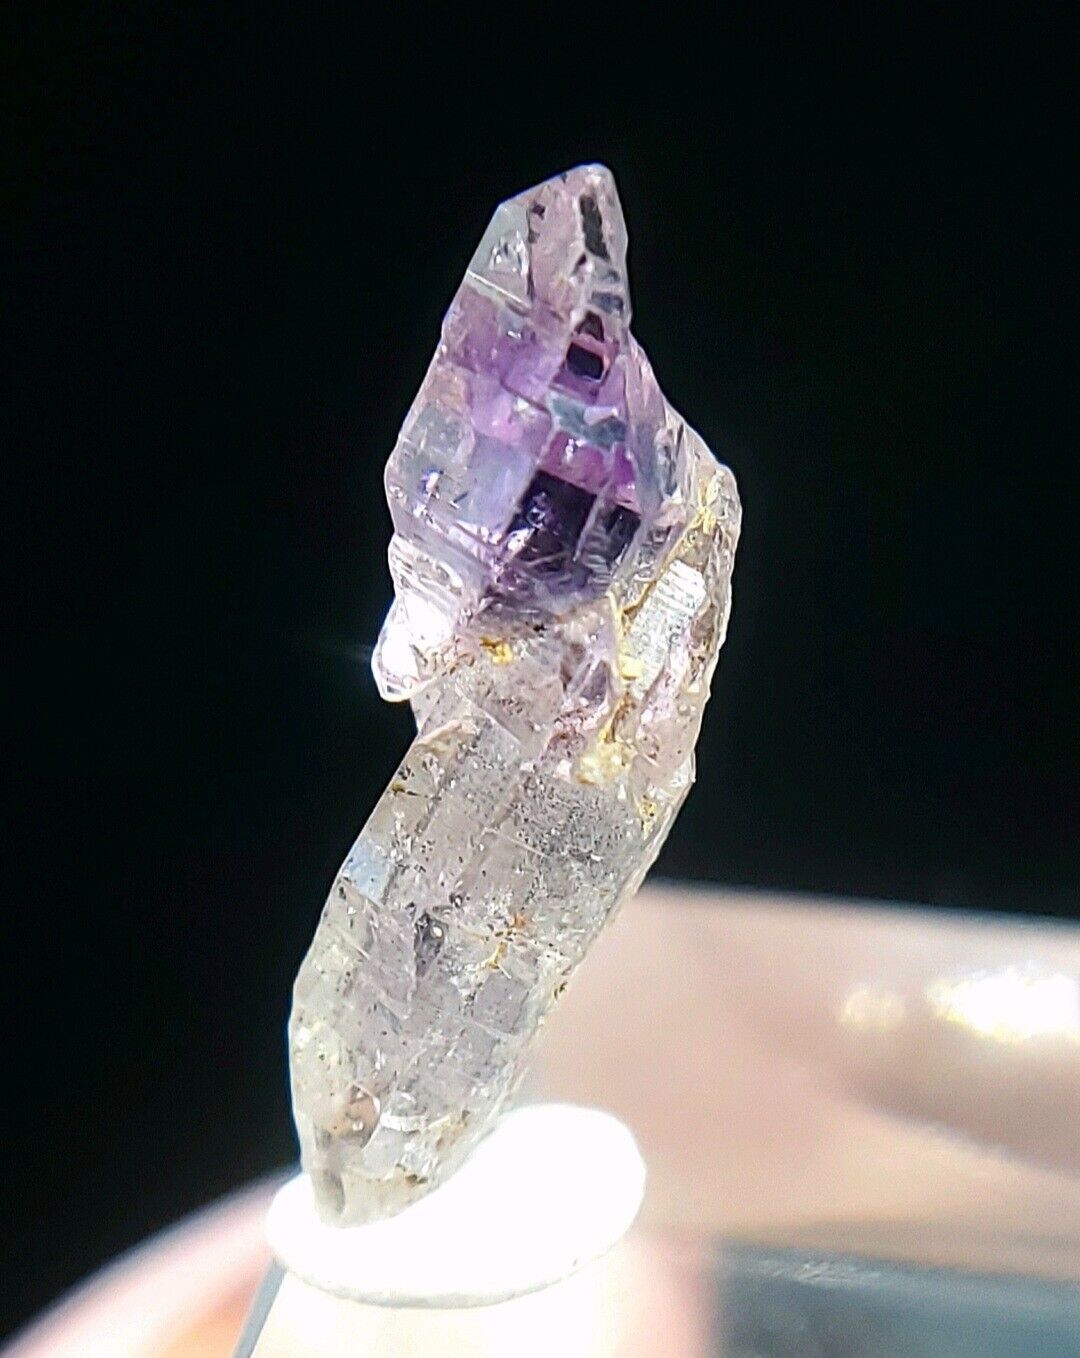 Amethyst Floater Crystal From Tanzania, Africa